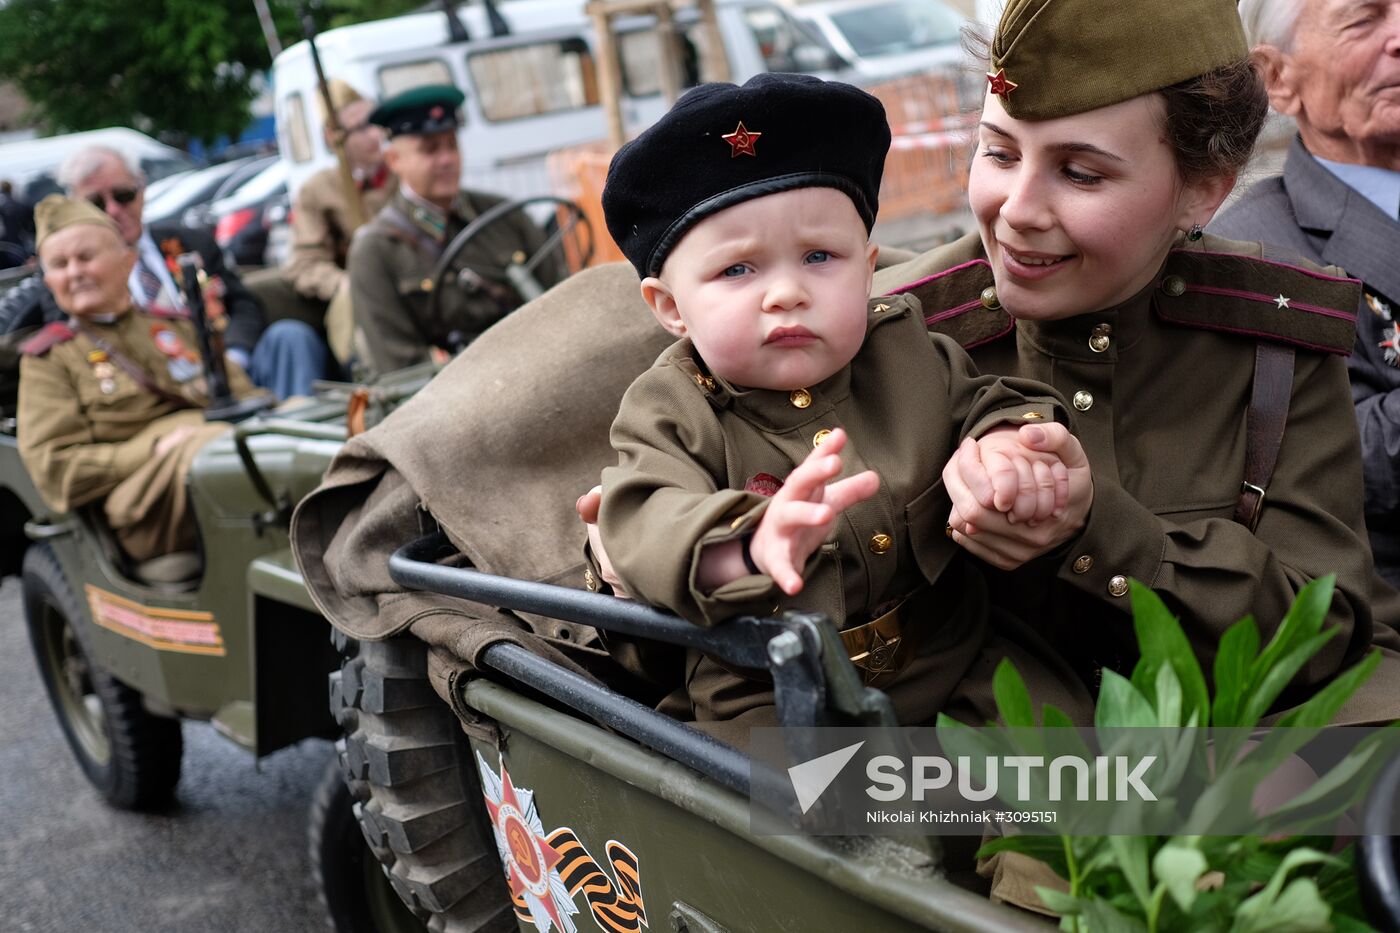 Military parade in Russian cities marking the 72nd anniversary of Victory